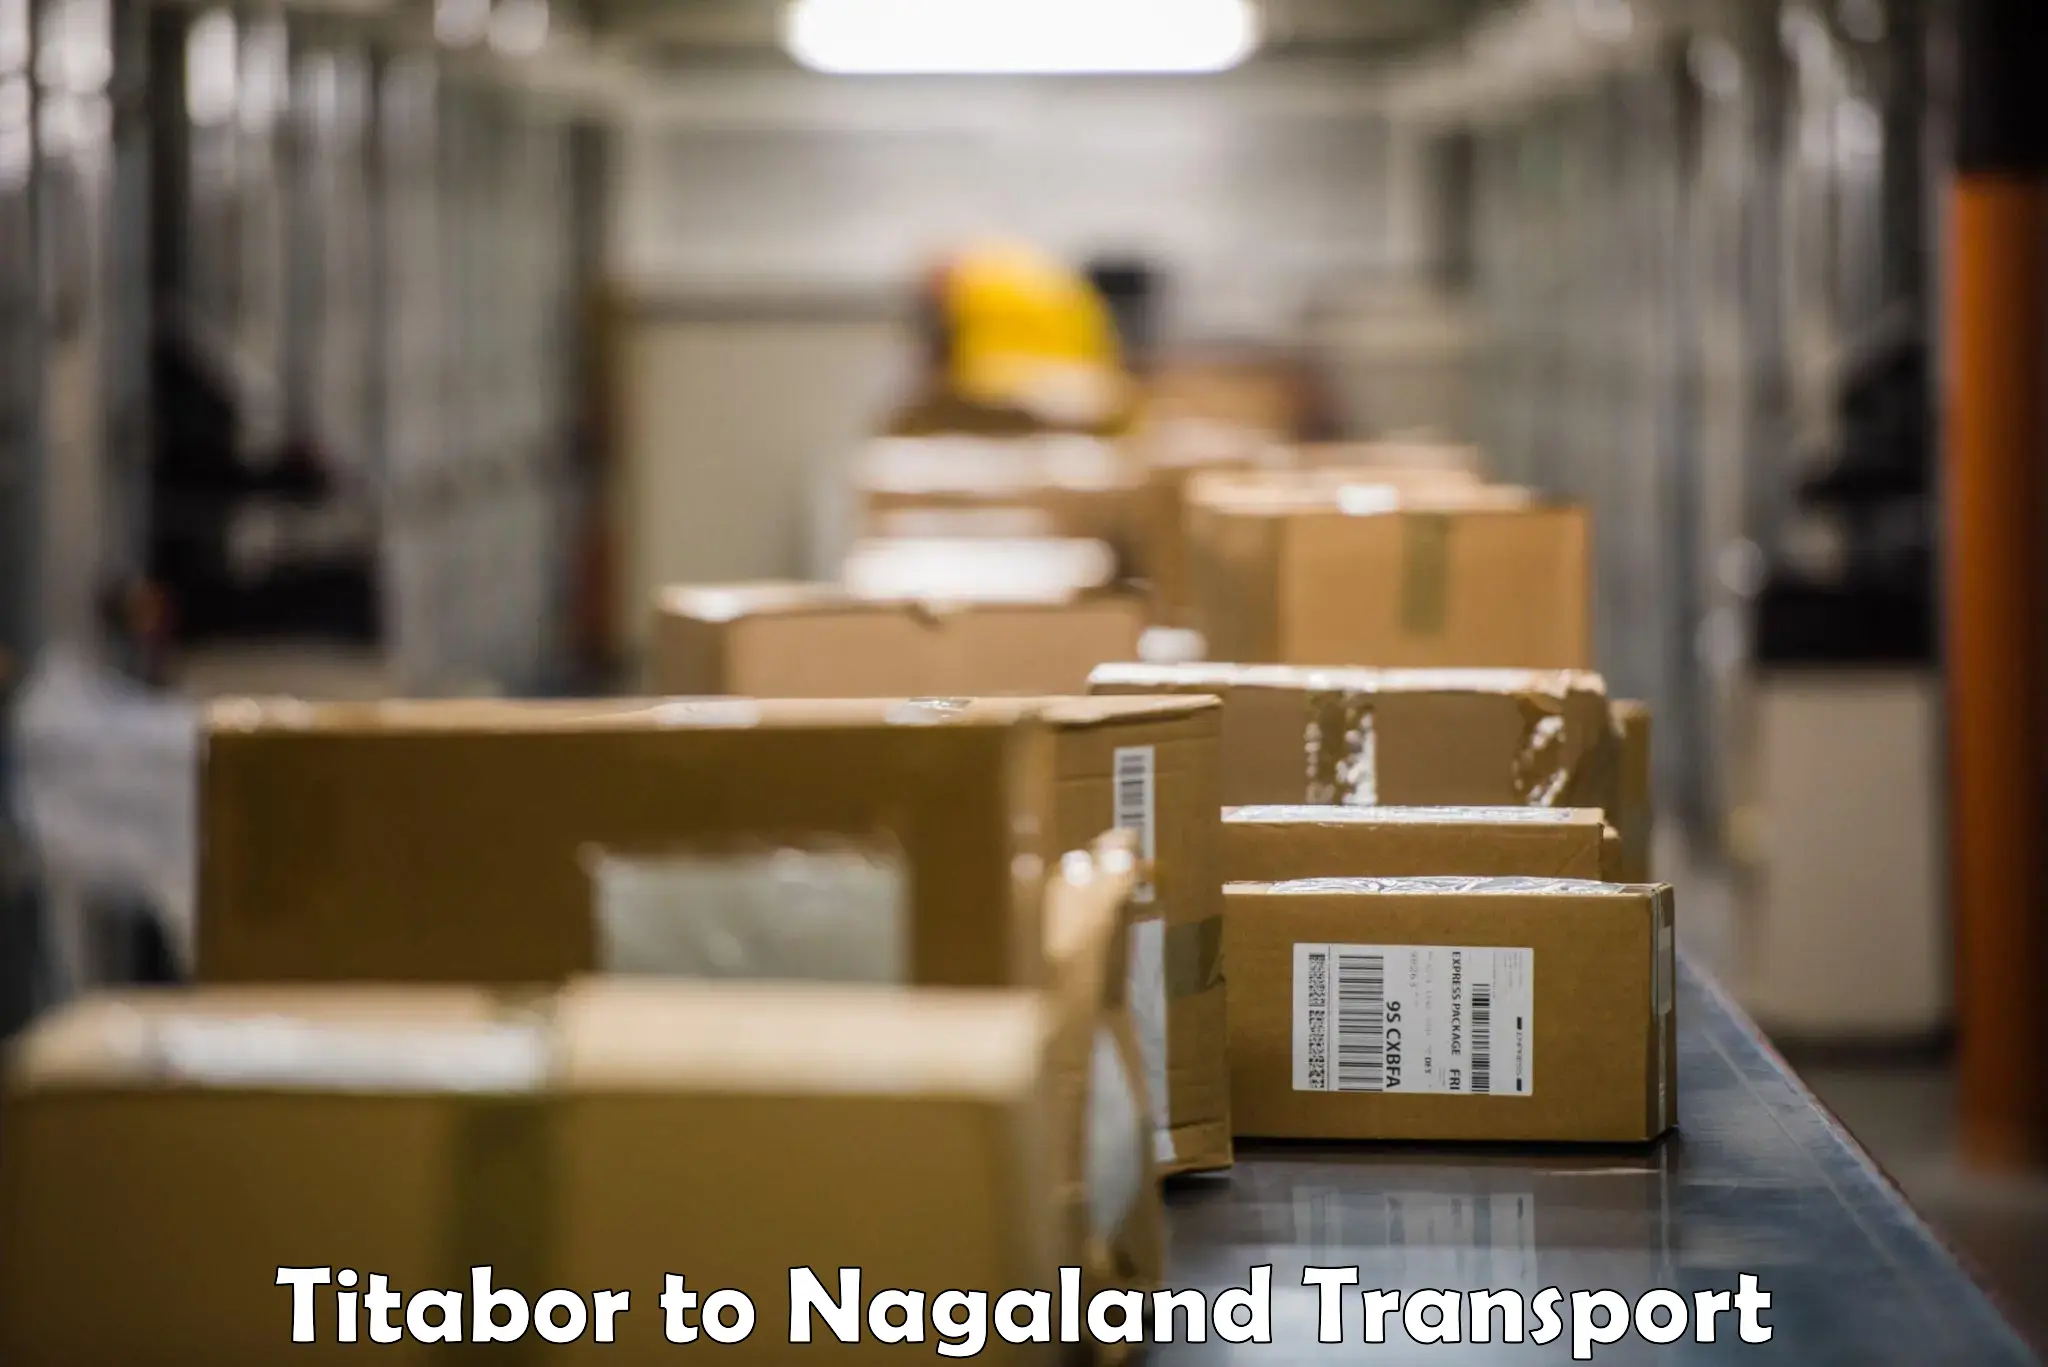 Container transport service Titabor to Nagaland